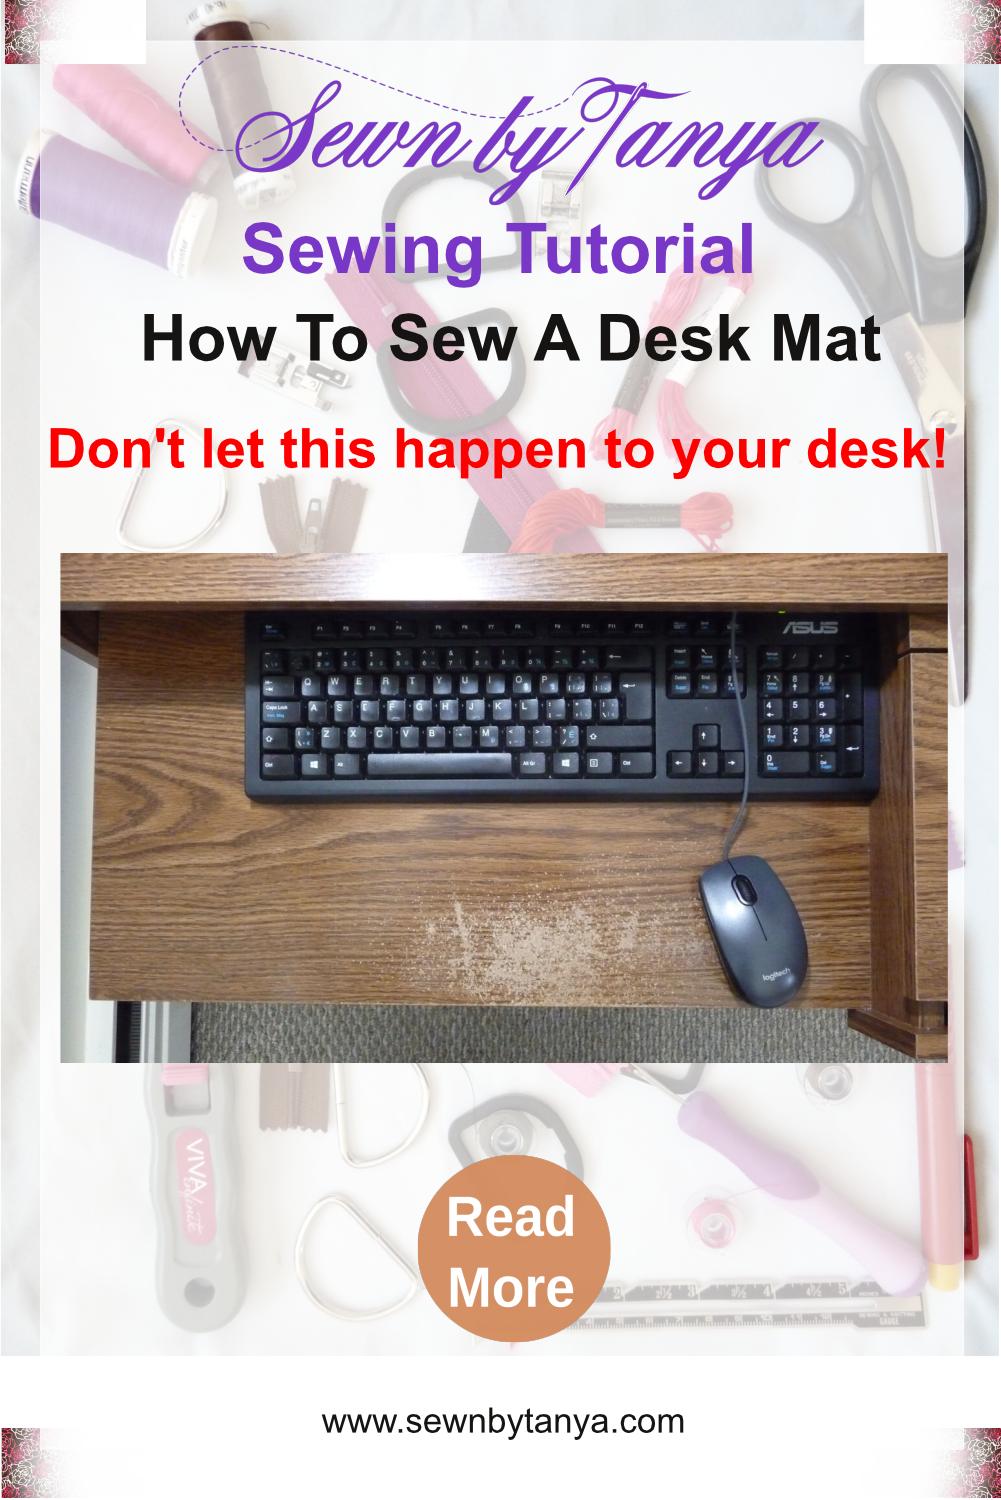 Pinterest image for "Sewn By Tanya Sewing Tutorial | How To Sew A Desk Mat - Dont let this happen to your desk" showing a photo of a damaged keyboard shelf